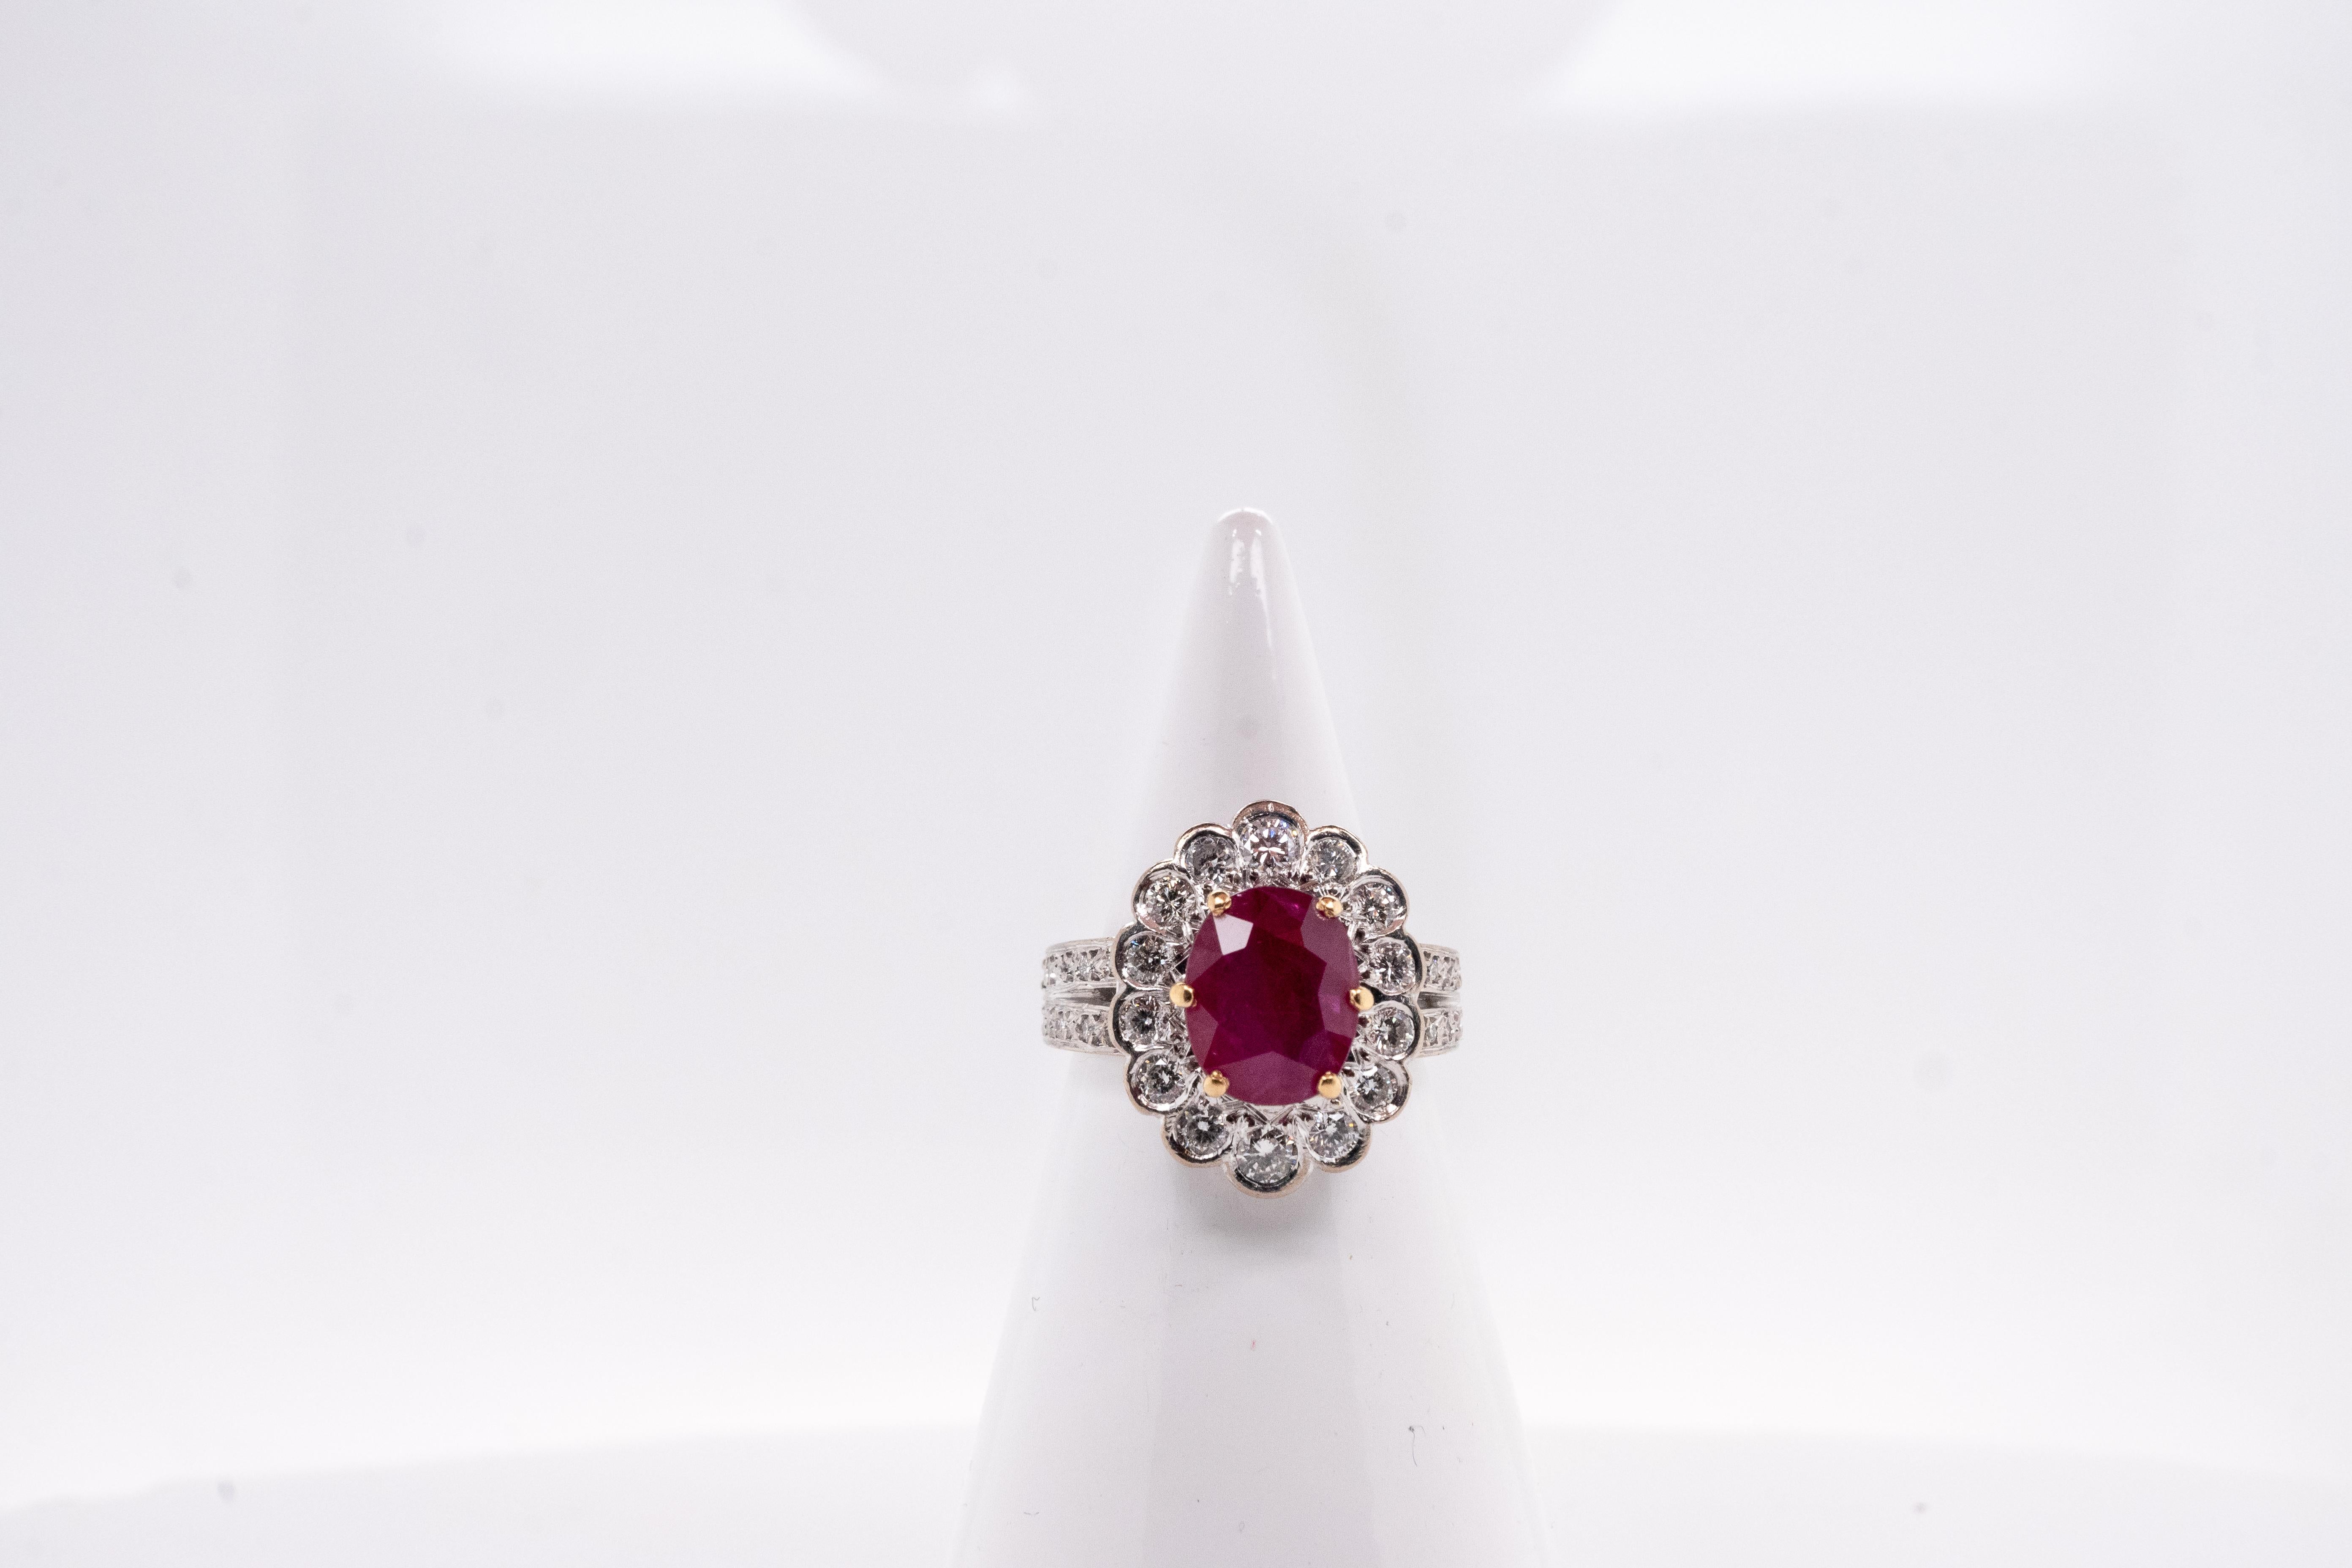 Discover the elegance of our white gold ring, featuring refined design with the splendor of precious stones. This ring is adorned with a captivating 2.85-carat ruby, adding a touch of vibrant color. The 6 yellow gold claws set the oval-cut ruby.